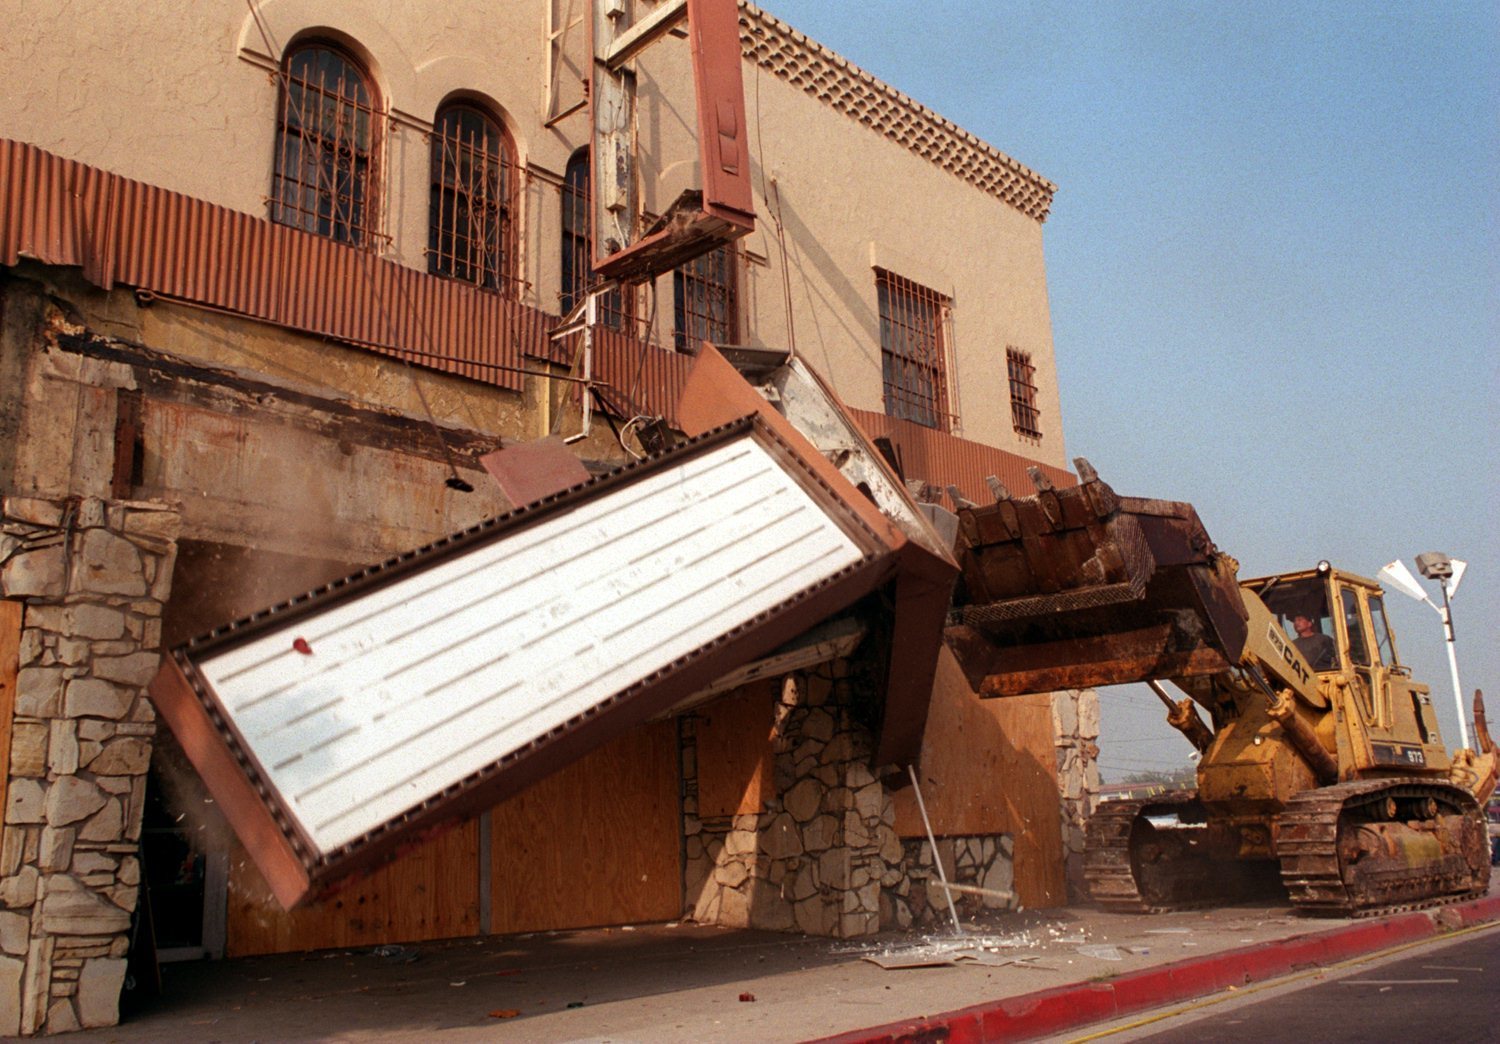 A bulldozer knocks down the marquee of the Pussycat Theater in Buena Park in 1995 after years of legal challenges.